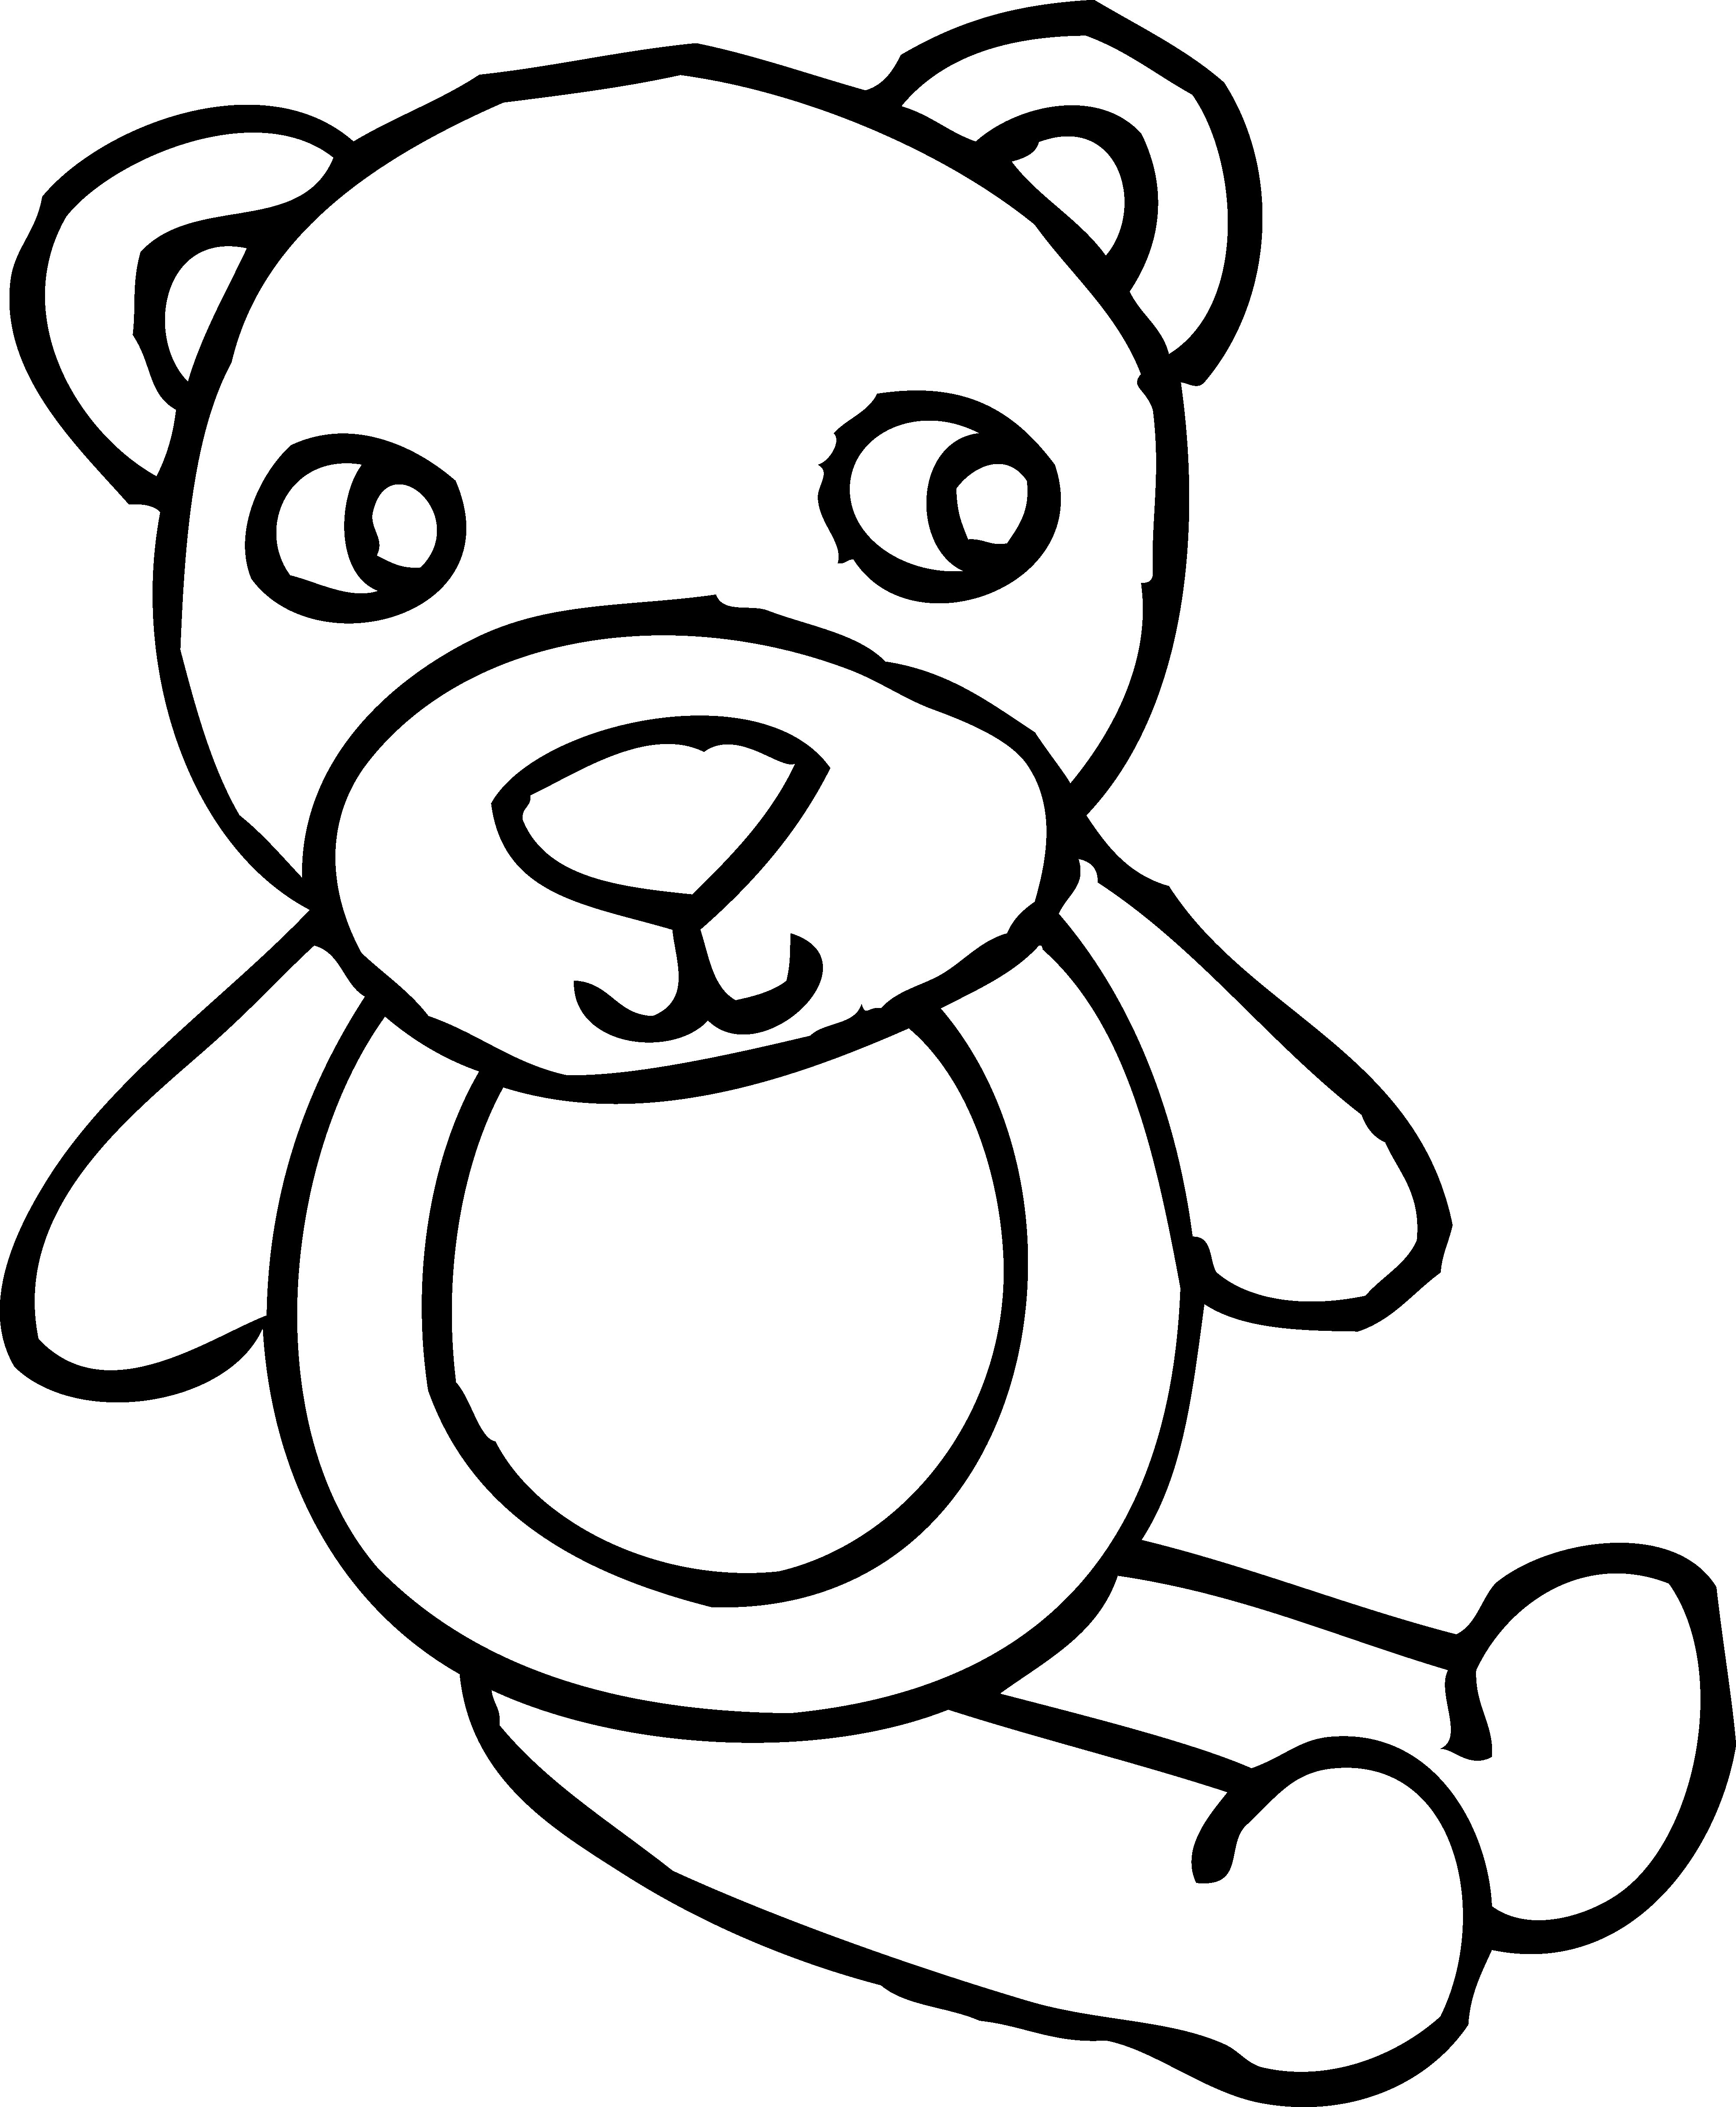 Teddy Bear Toy Coloring Page - Free Clip Art